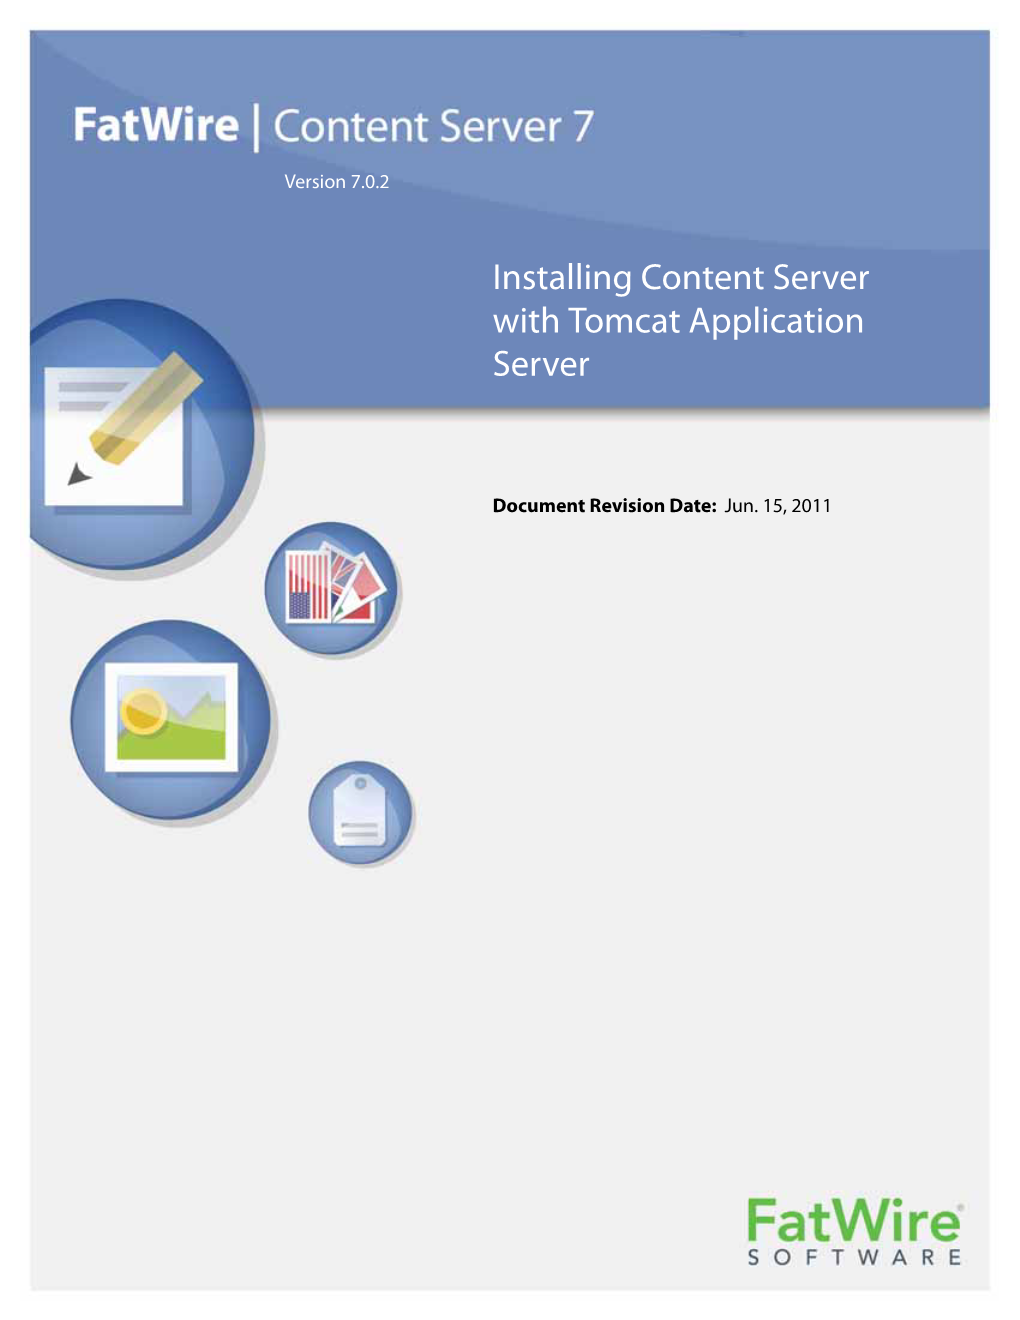 Installing Content Server with Tomcat Application Server